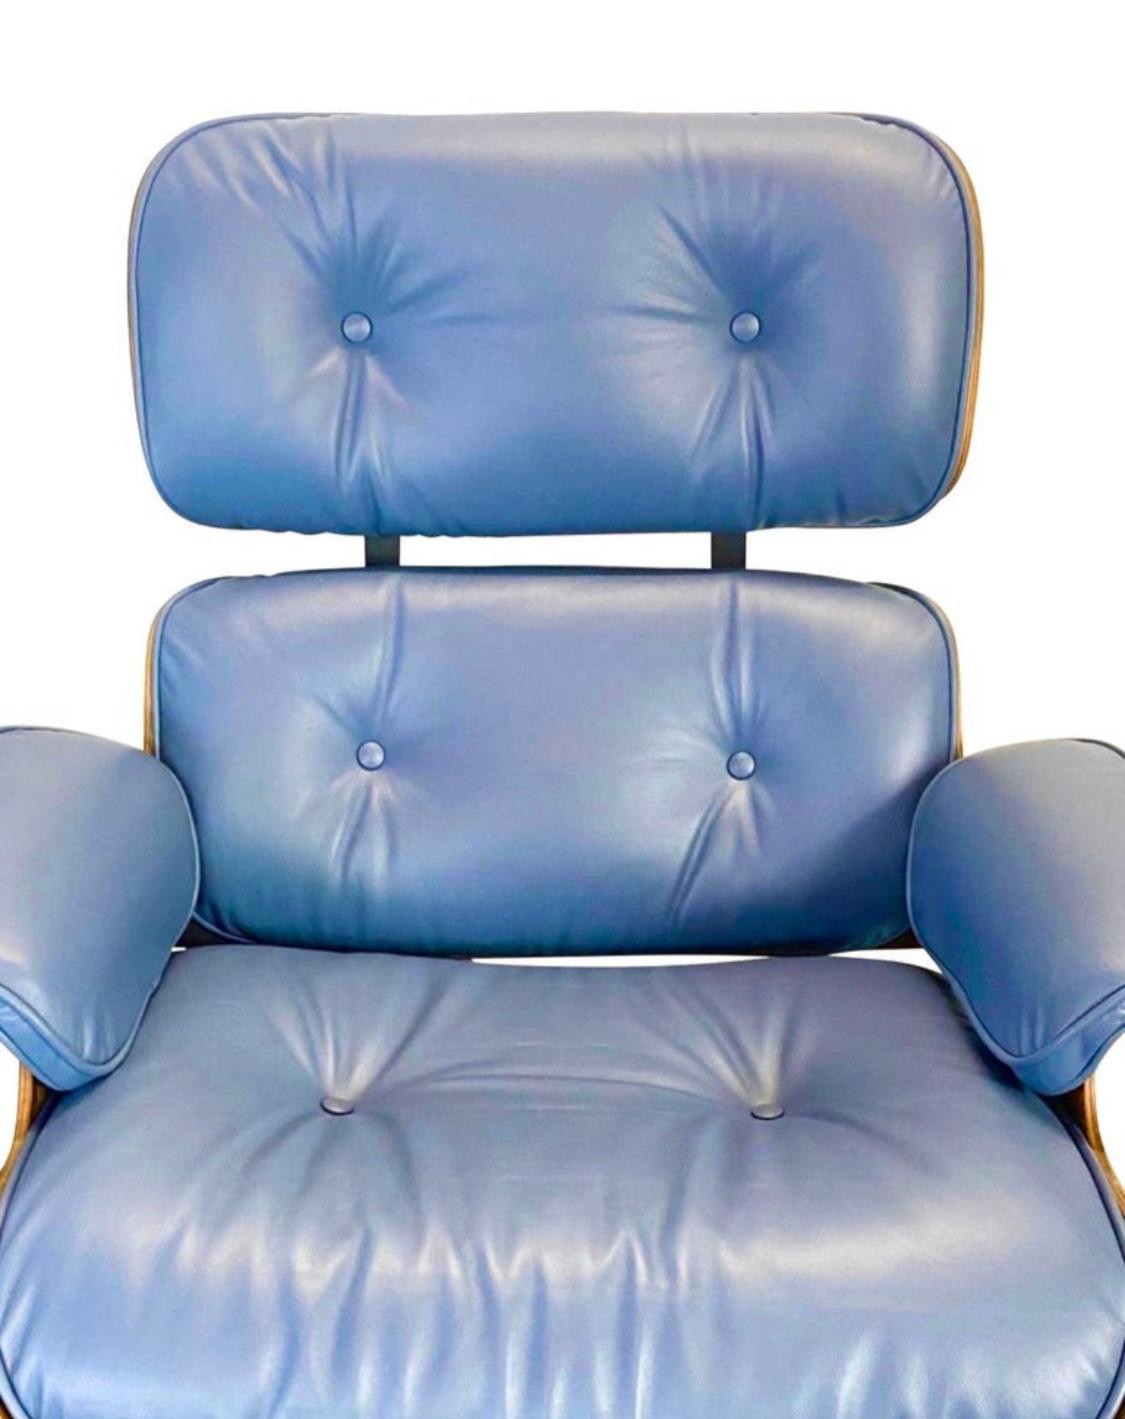 A restored vintage signed and authentic Herman Miller Eames lounge chair and ottoman in rose wood with custom new blue leather cushions with smooth and comfortable finish. The wood is cleaned and oiled, no missing parts or damages besides normal